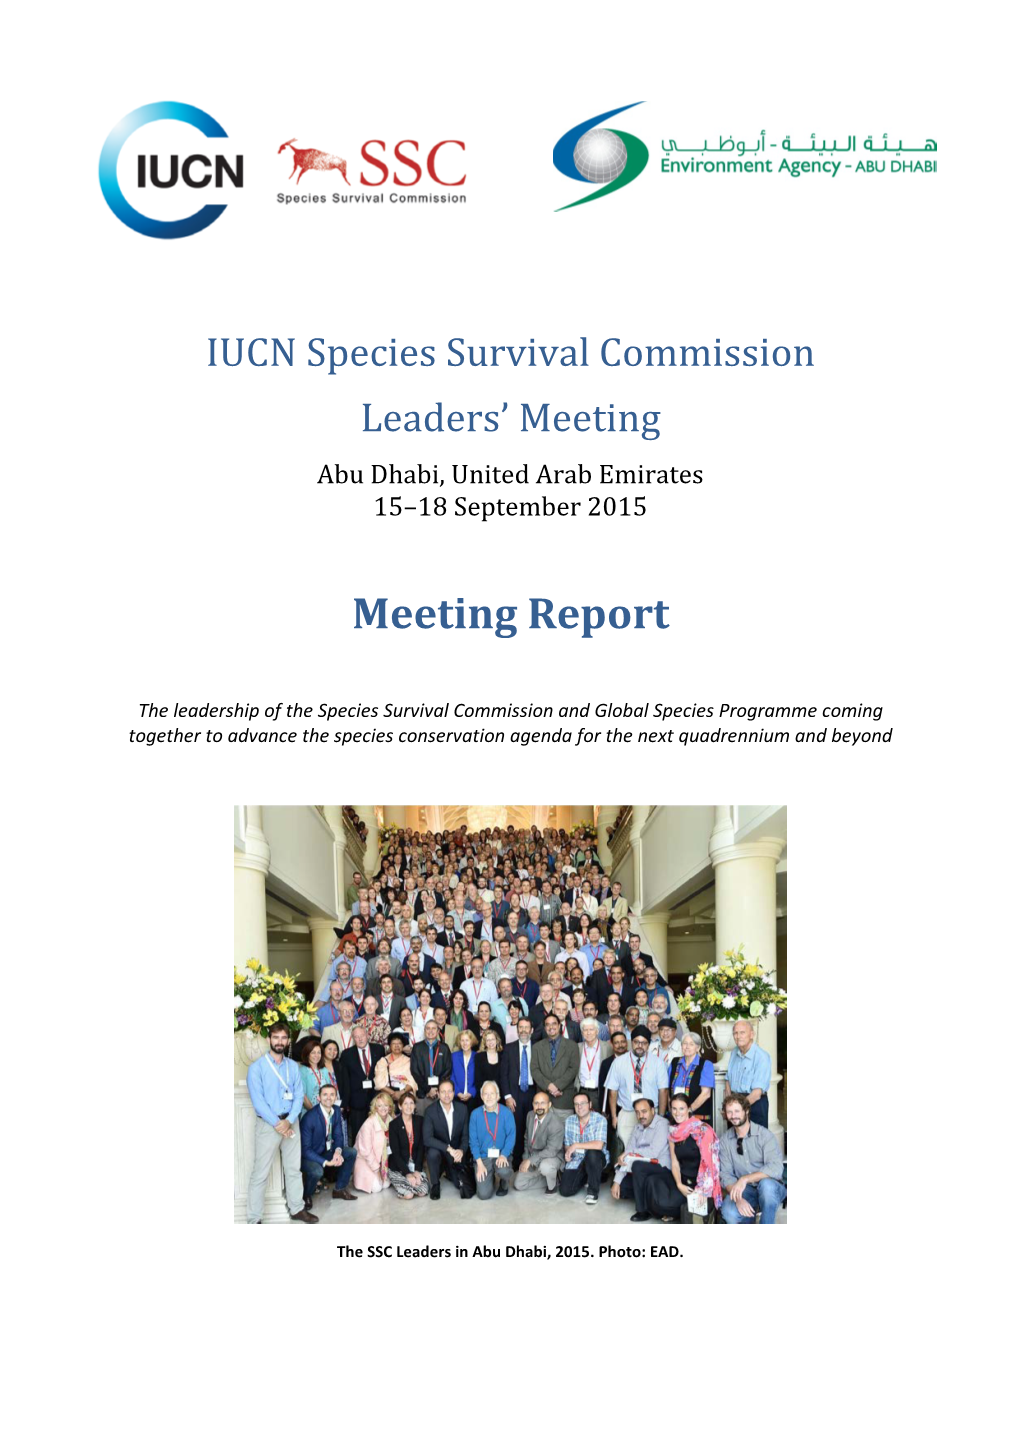 SSC Leaders' Meeting 2015 Report